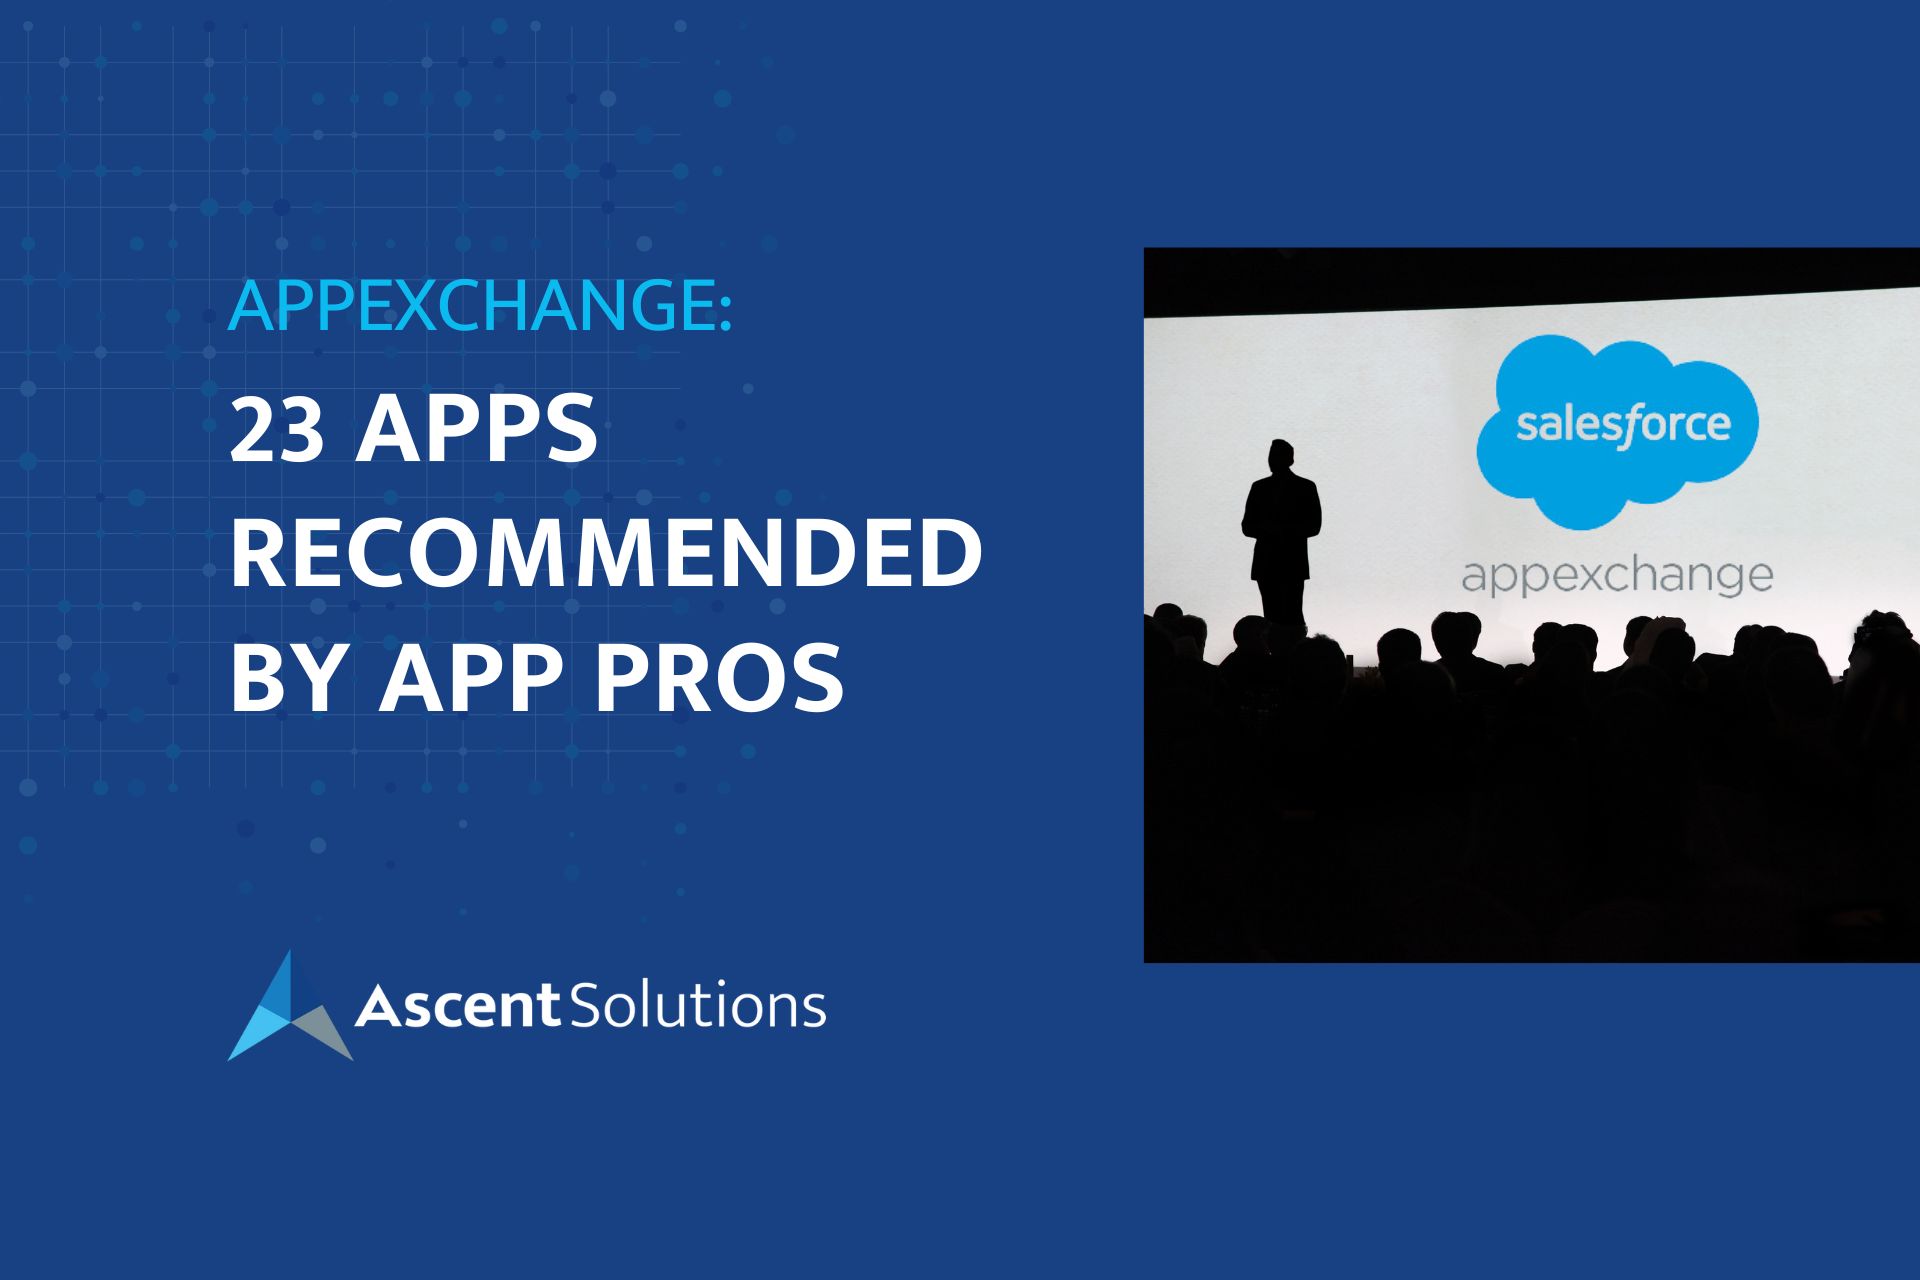 Appexchange 23 APPS Recommended by APP PROS